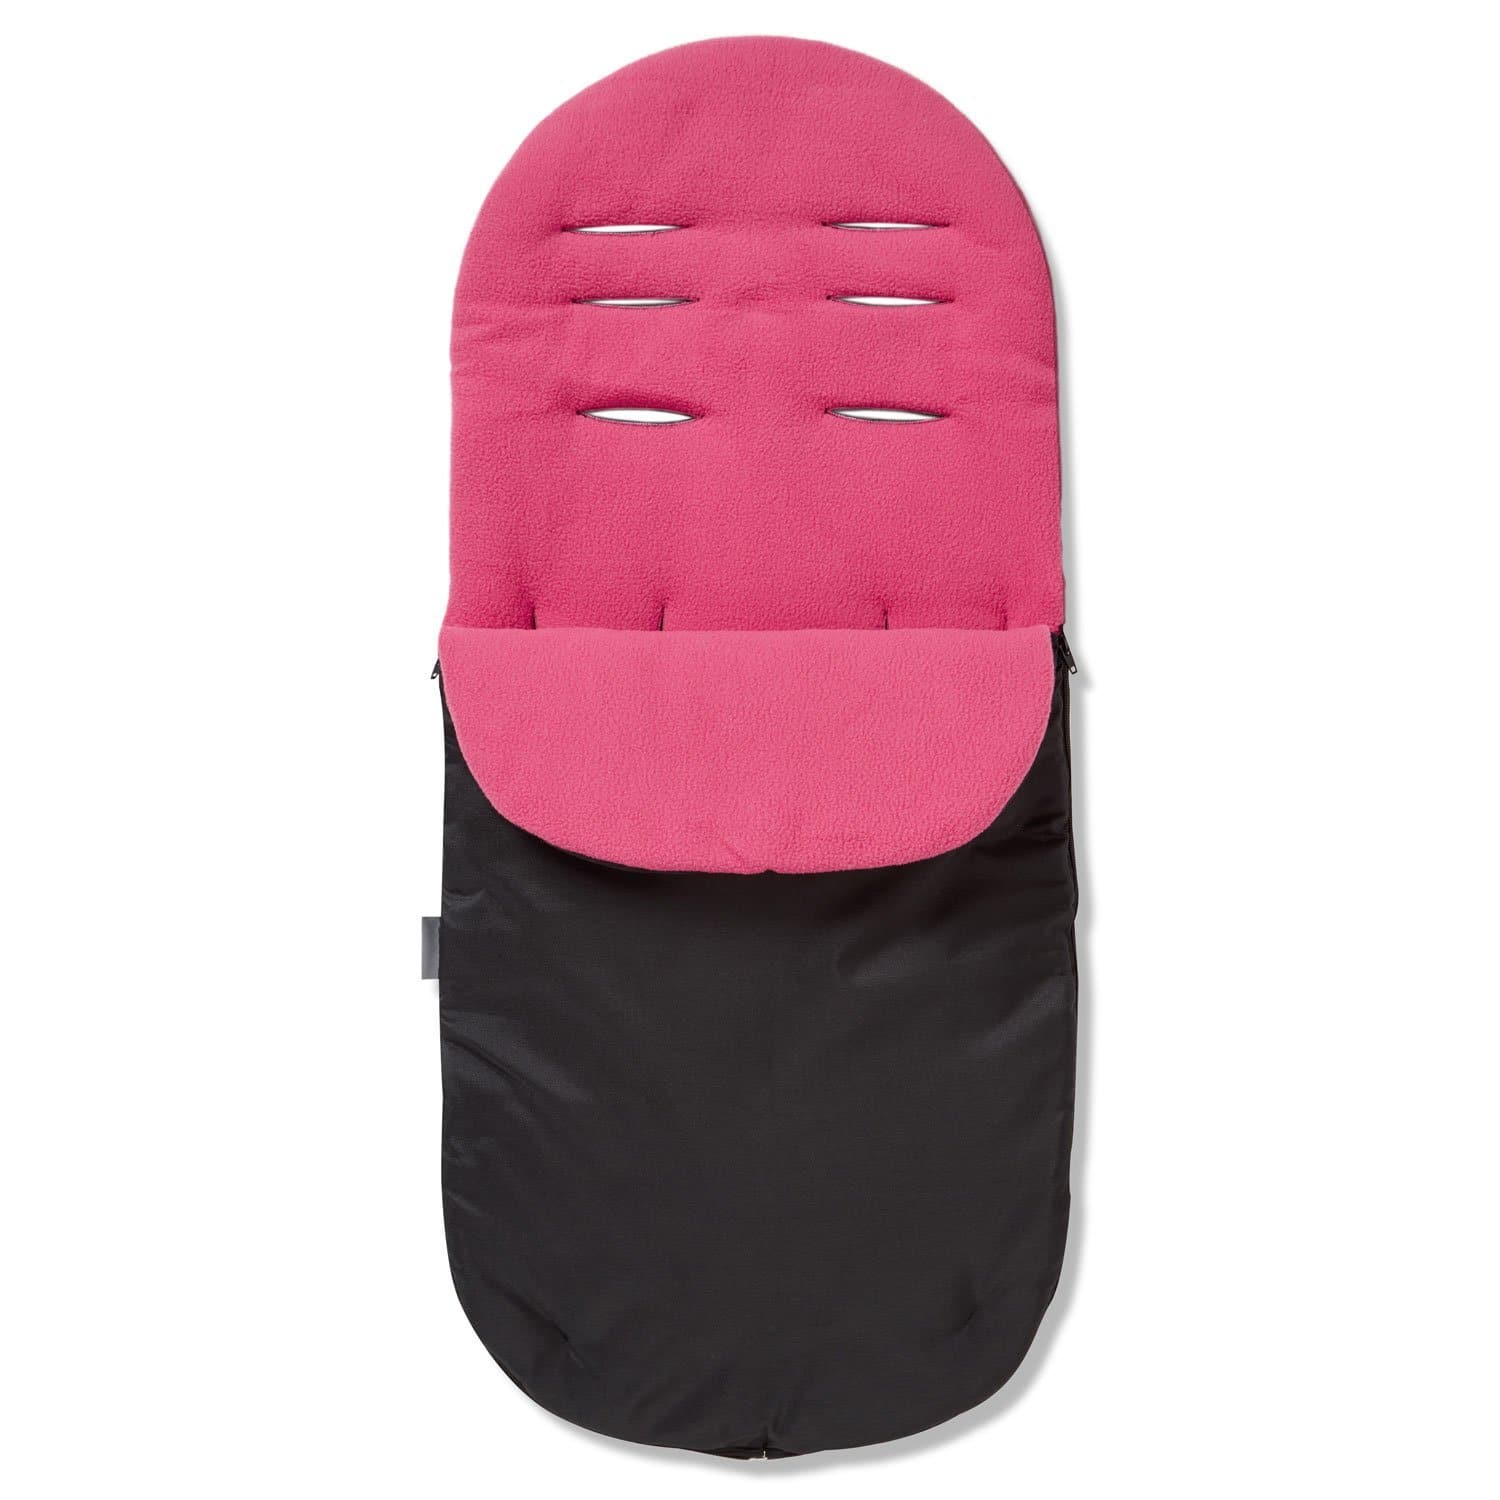 Footmuff / Cosy Toes Compatible with XTS - Dark Pink / Fits All Models | For Your Little One